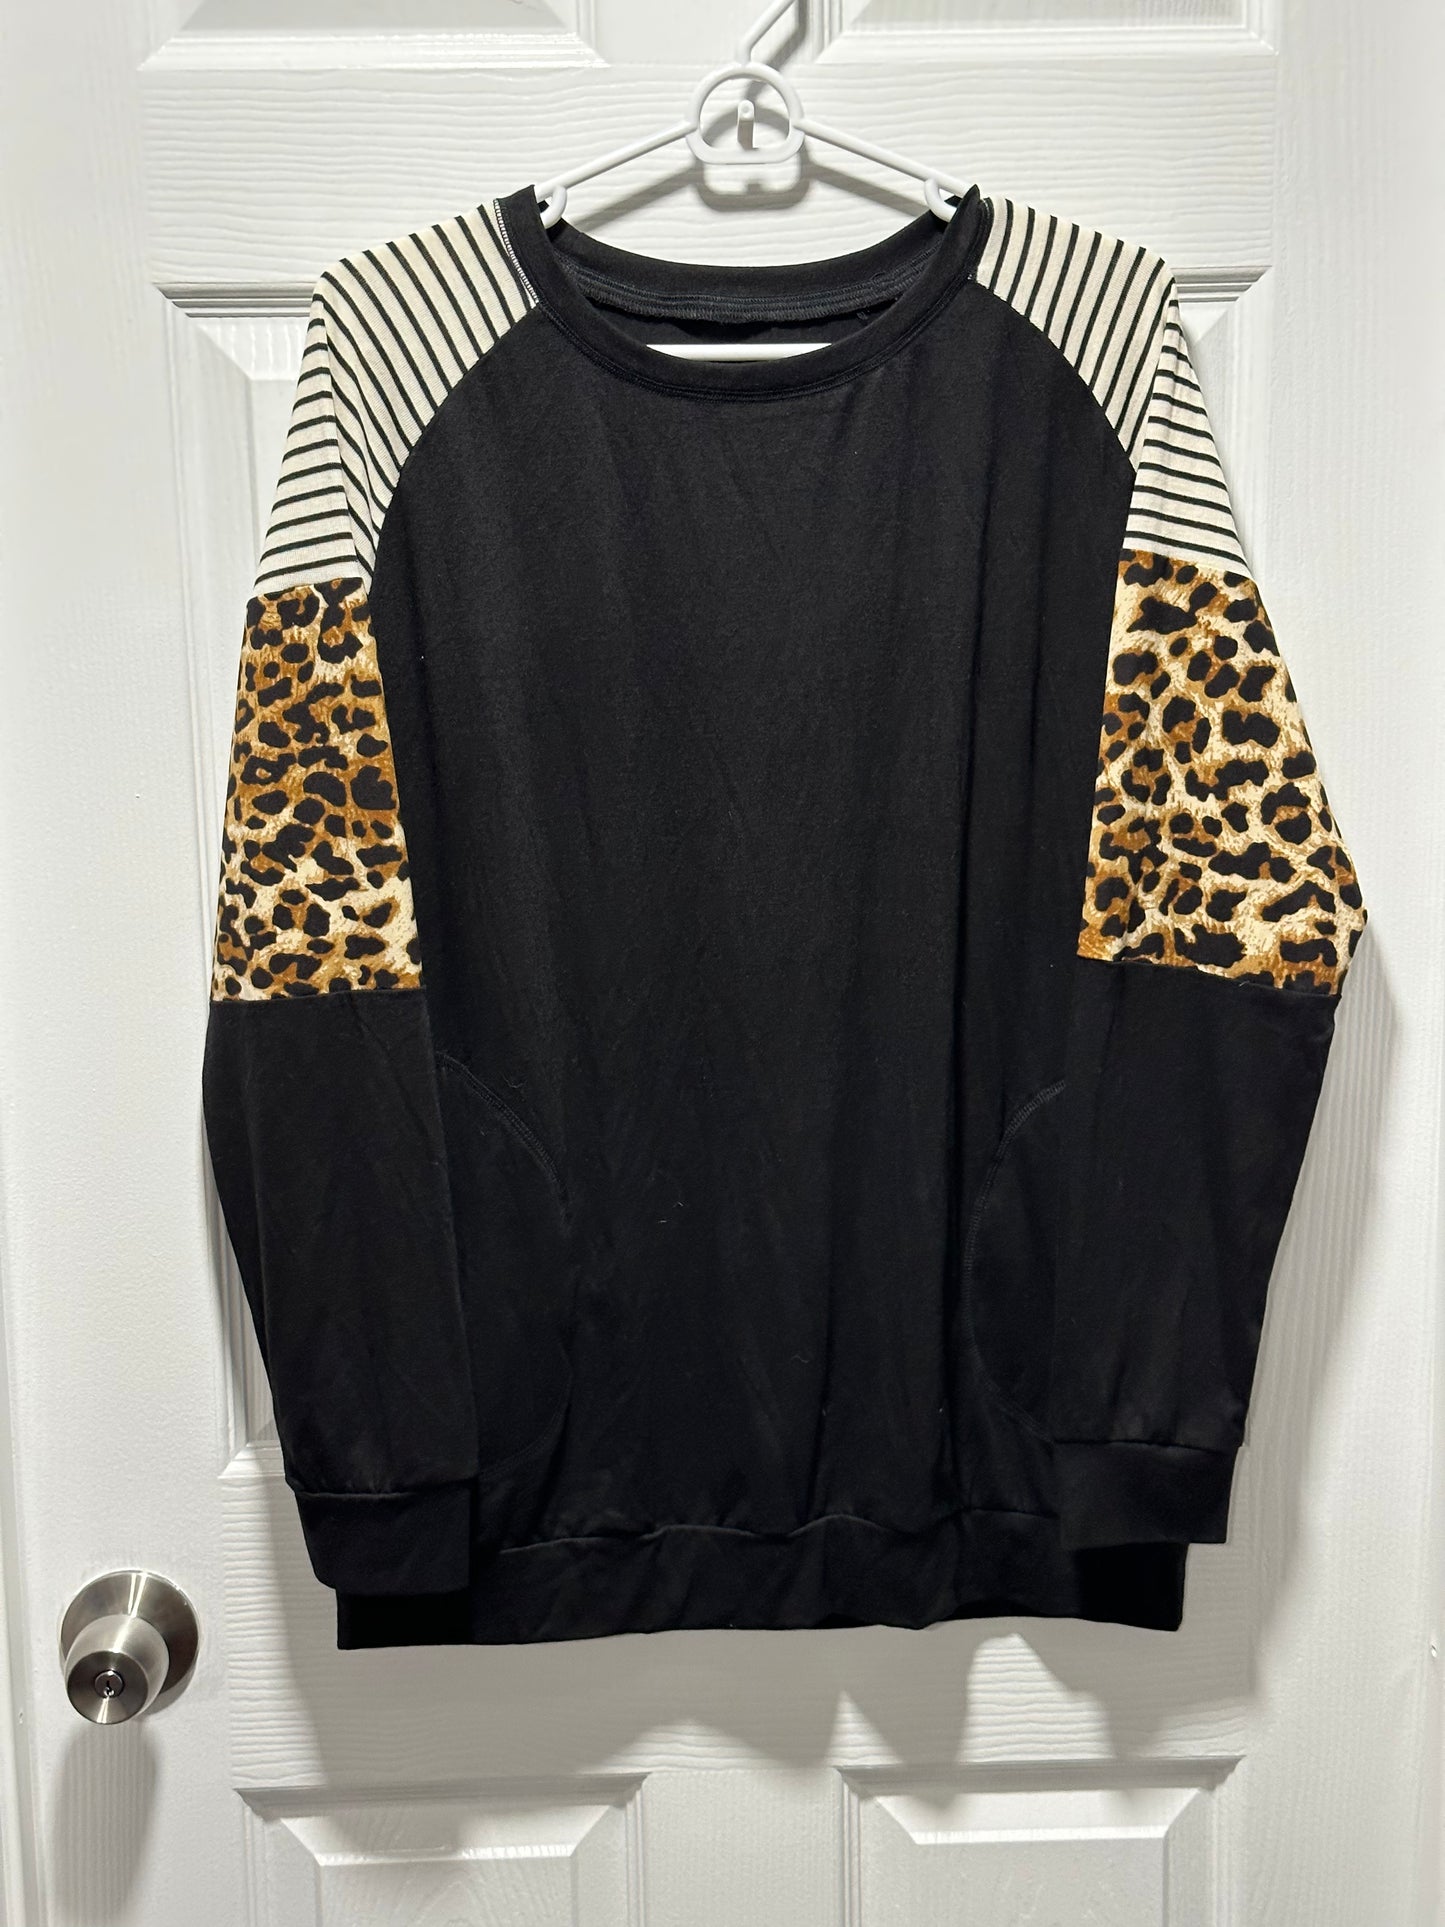 Black Sweater with Cheetah & Striped Arms & Pockets - Women’s M (unbranded) - NWOT